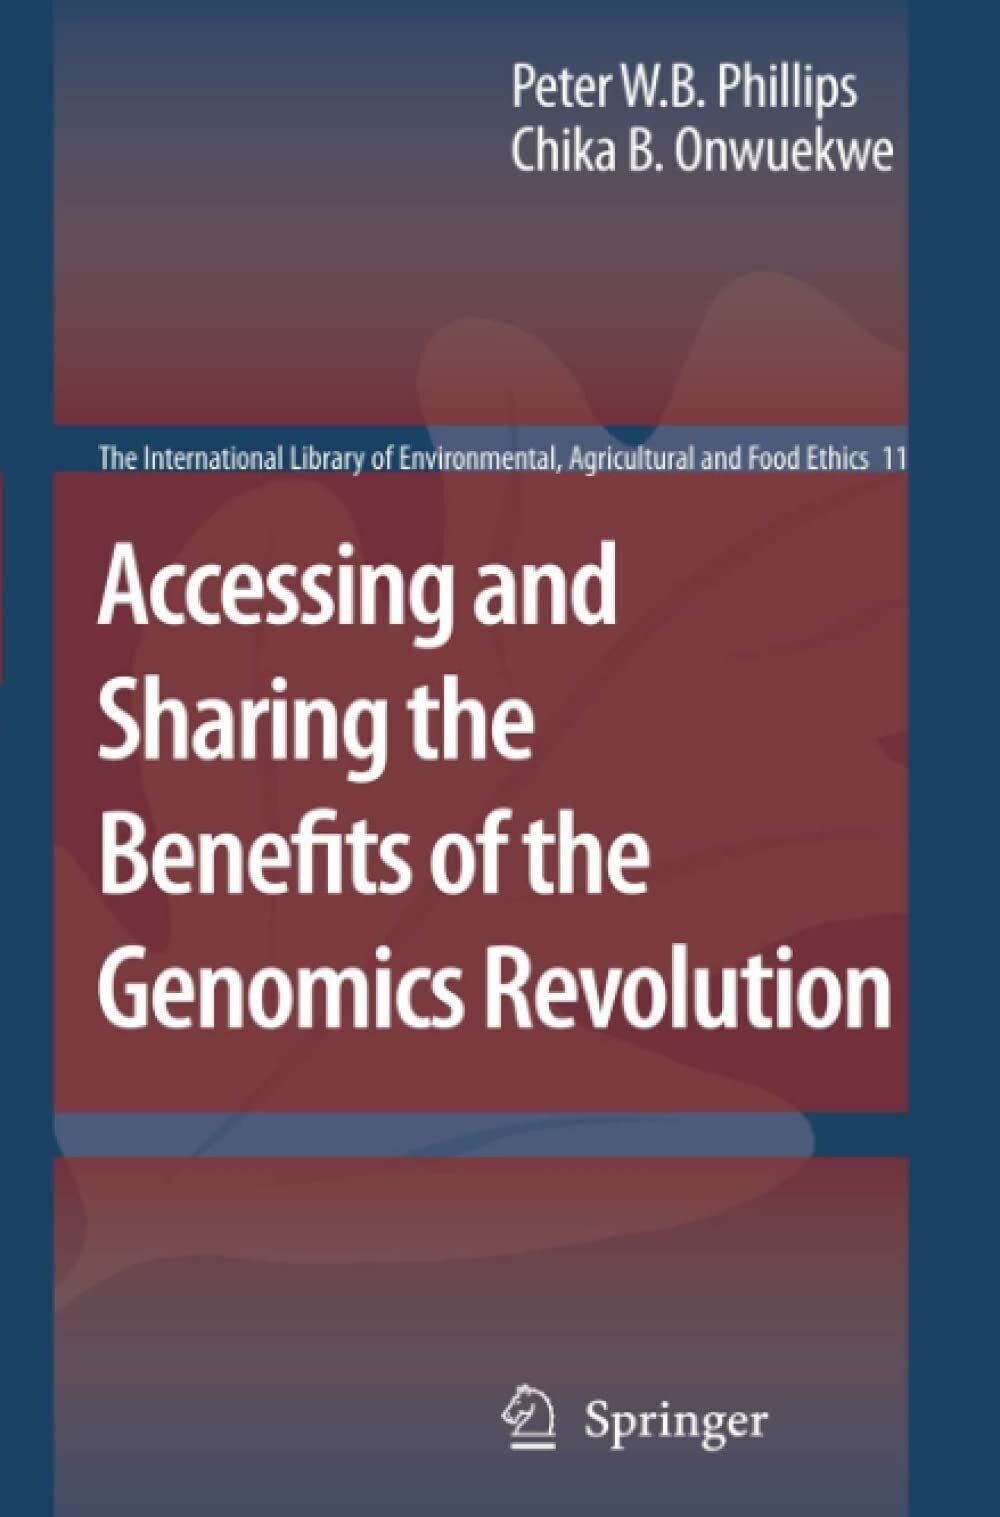 Accessing and Sharing the Benefits of the Genomics Revolution - Springer, 2010 libro usato